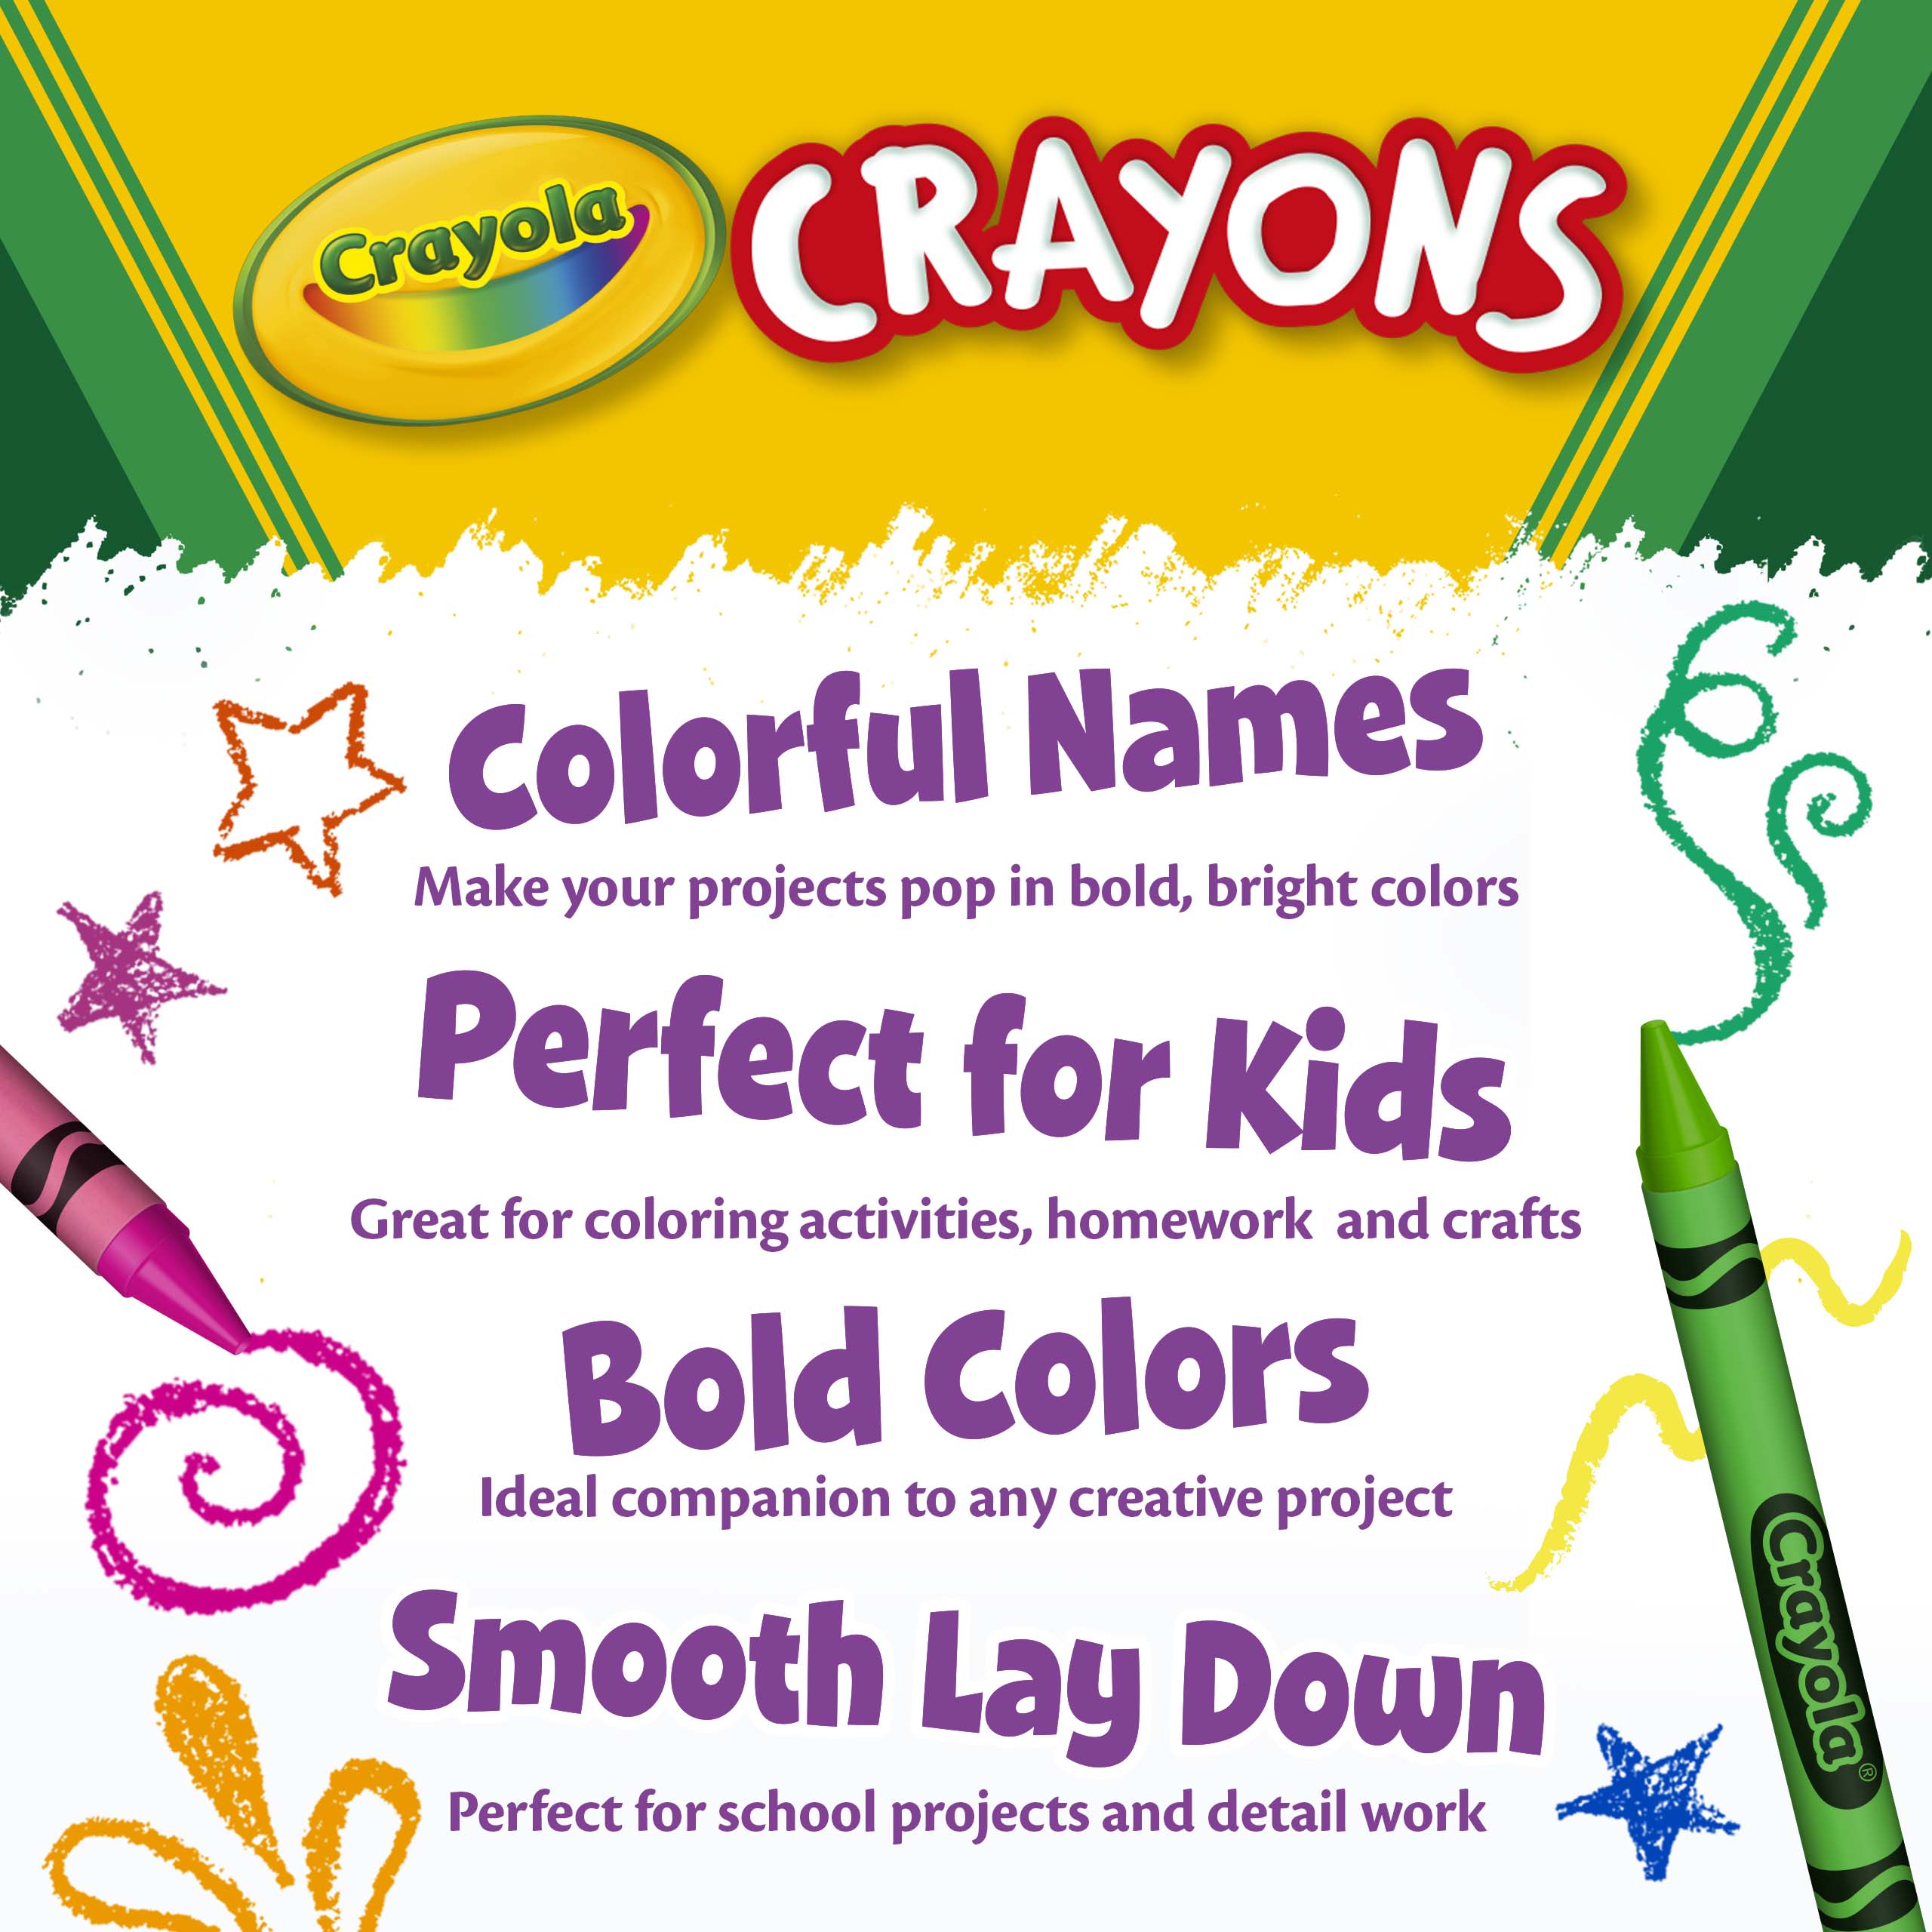 Crayola Crayons, 64 Ct, Back to School Supplies for Kids, Teacher Supplies, Gift - image 9 of 10